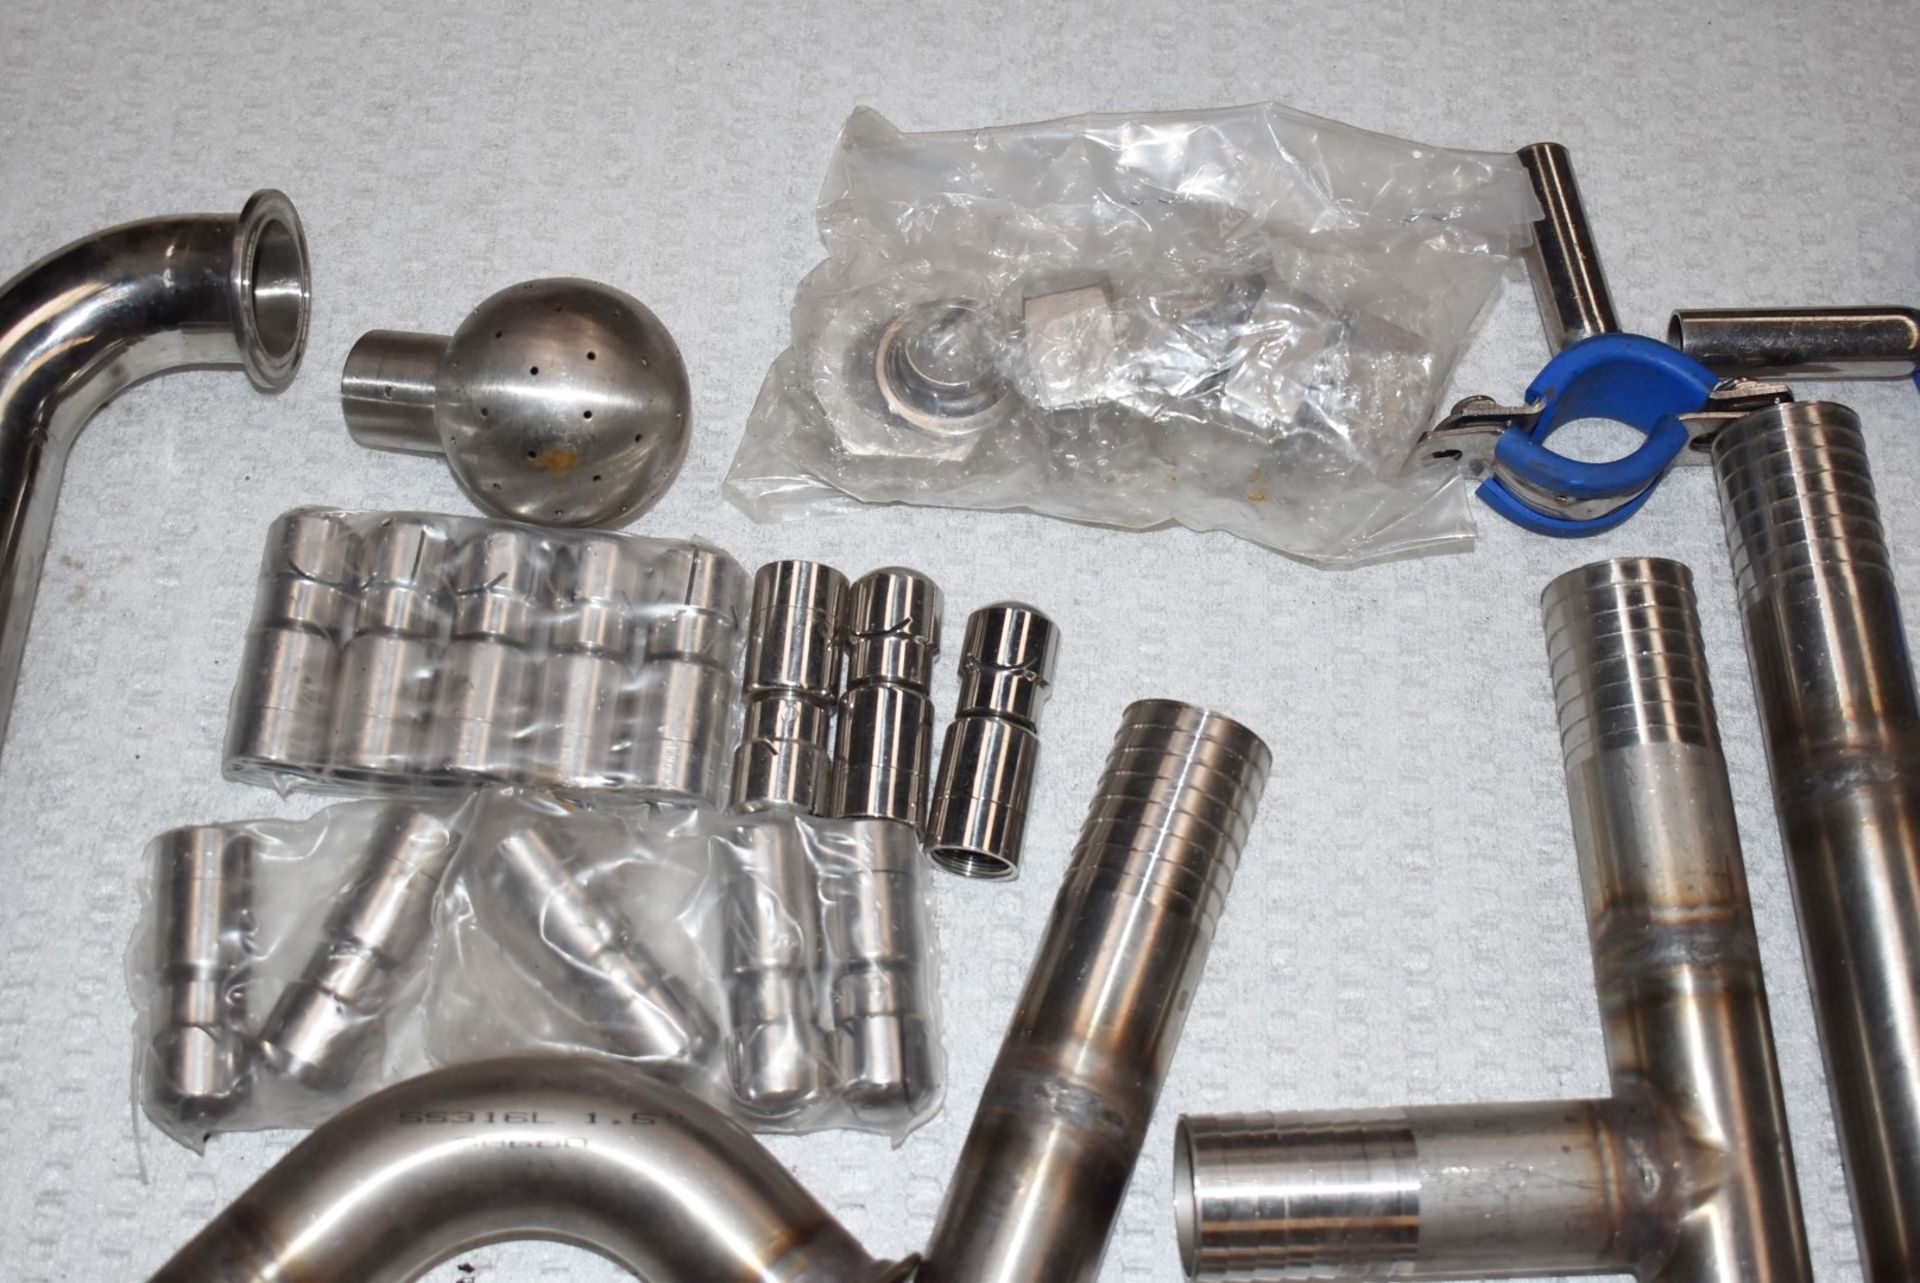 Assorted Job Lot of Stainless Steel Fittings For Brewery Equipment - Includes Approx 30 Pieces - - Image 10 of 17